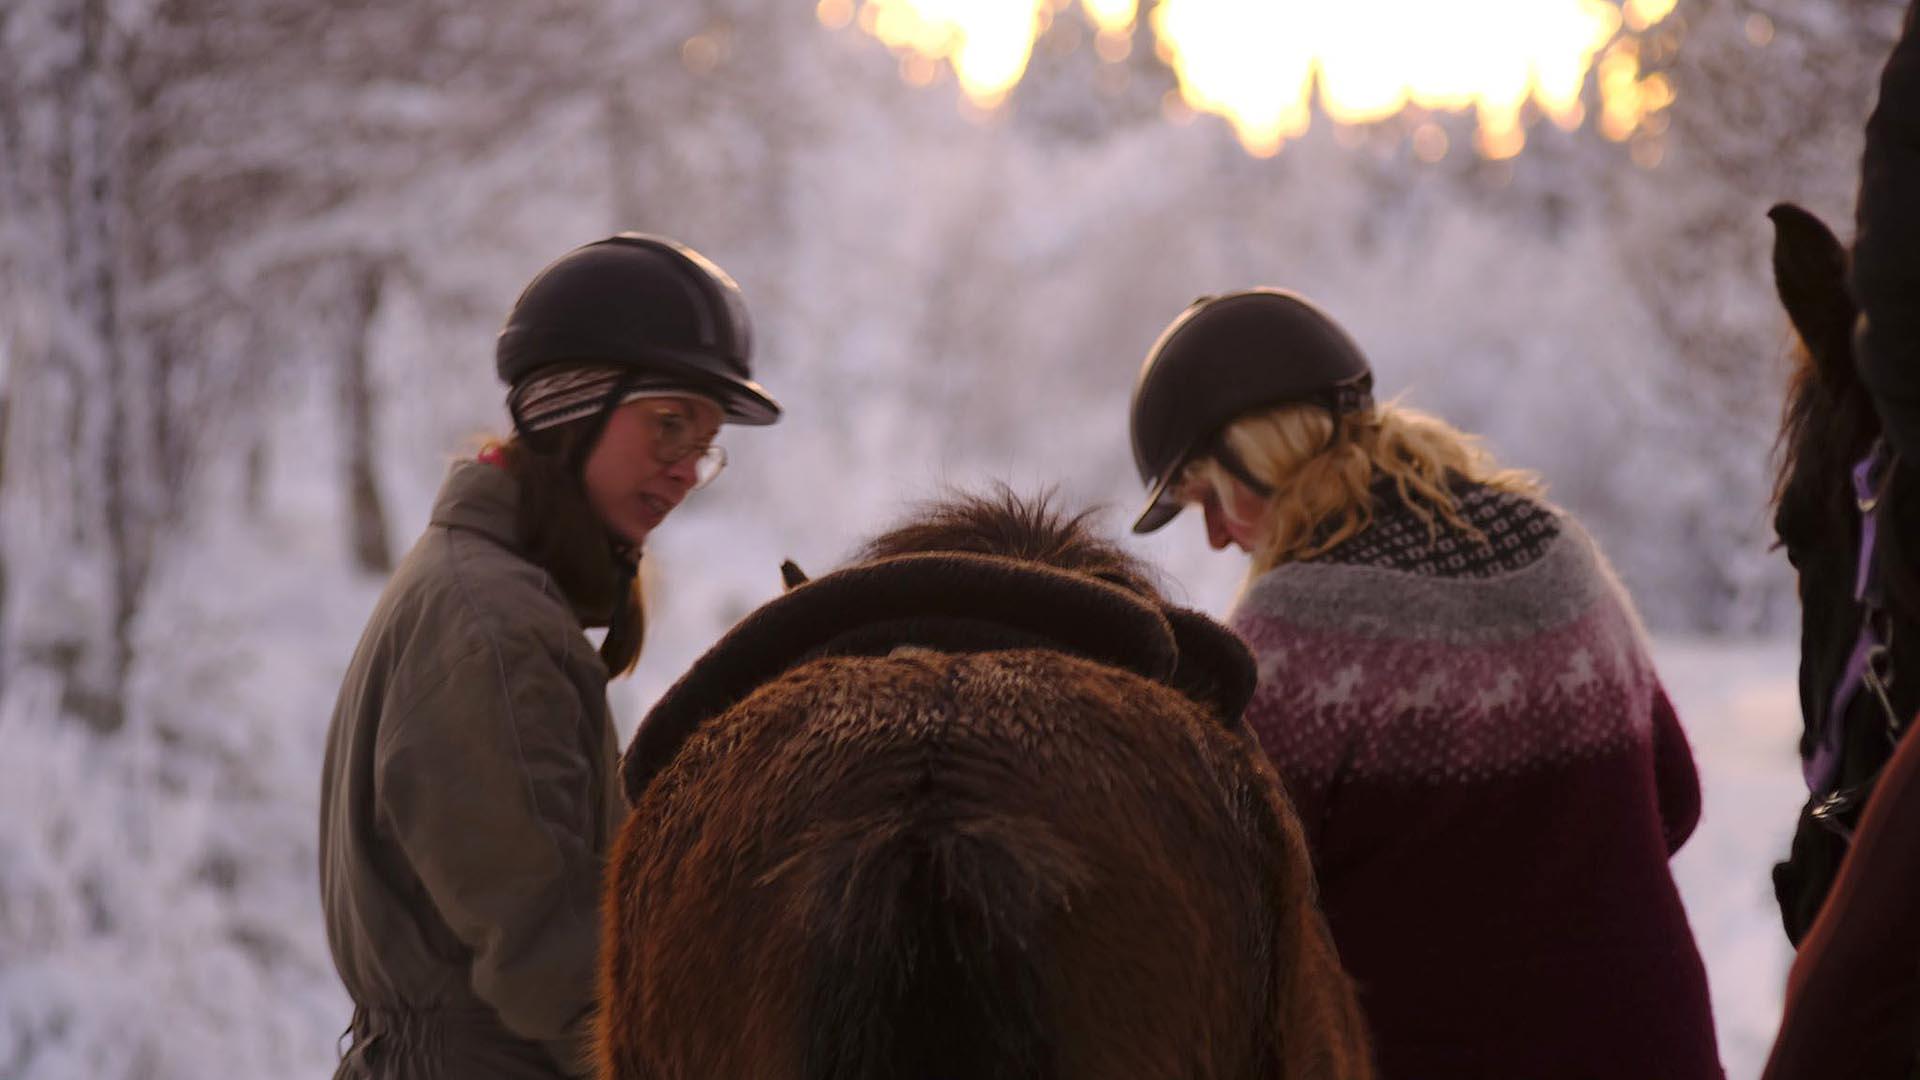 Two ladies with woolen sweaters and riding helmets walk besides an icelandic horse in the winter forest with a low sun against the scene